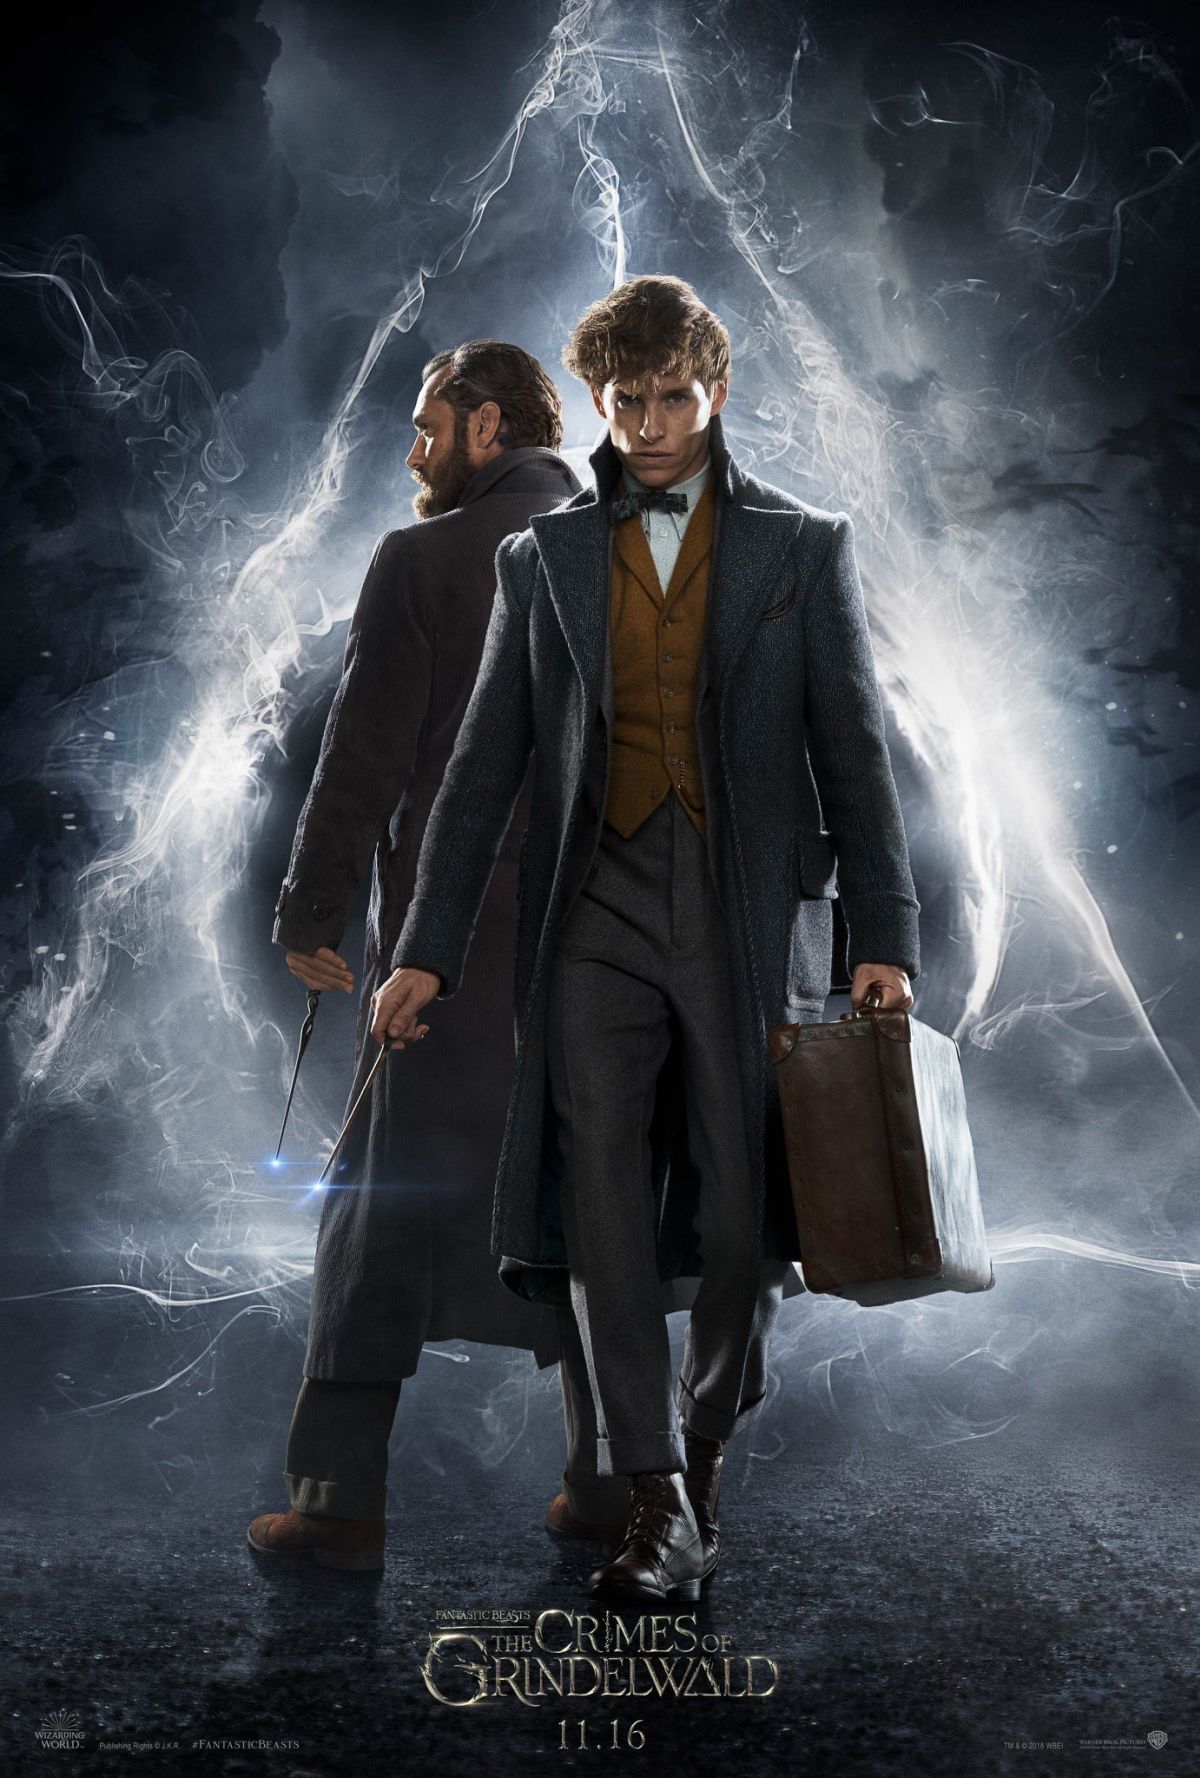 The Fantastic Beasts: The Crimes of Grindelwald Poster - Movienewz.com